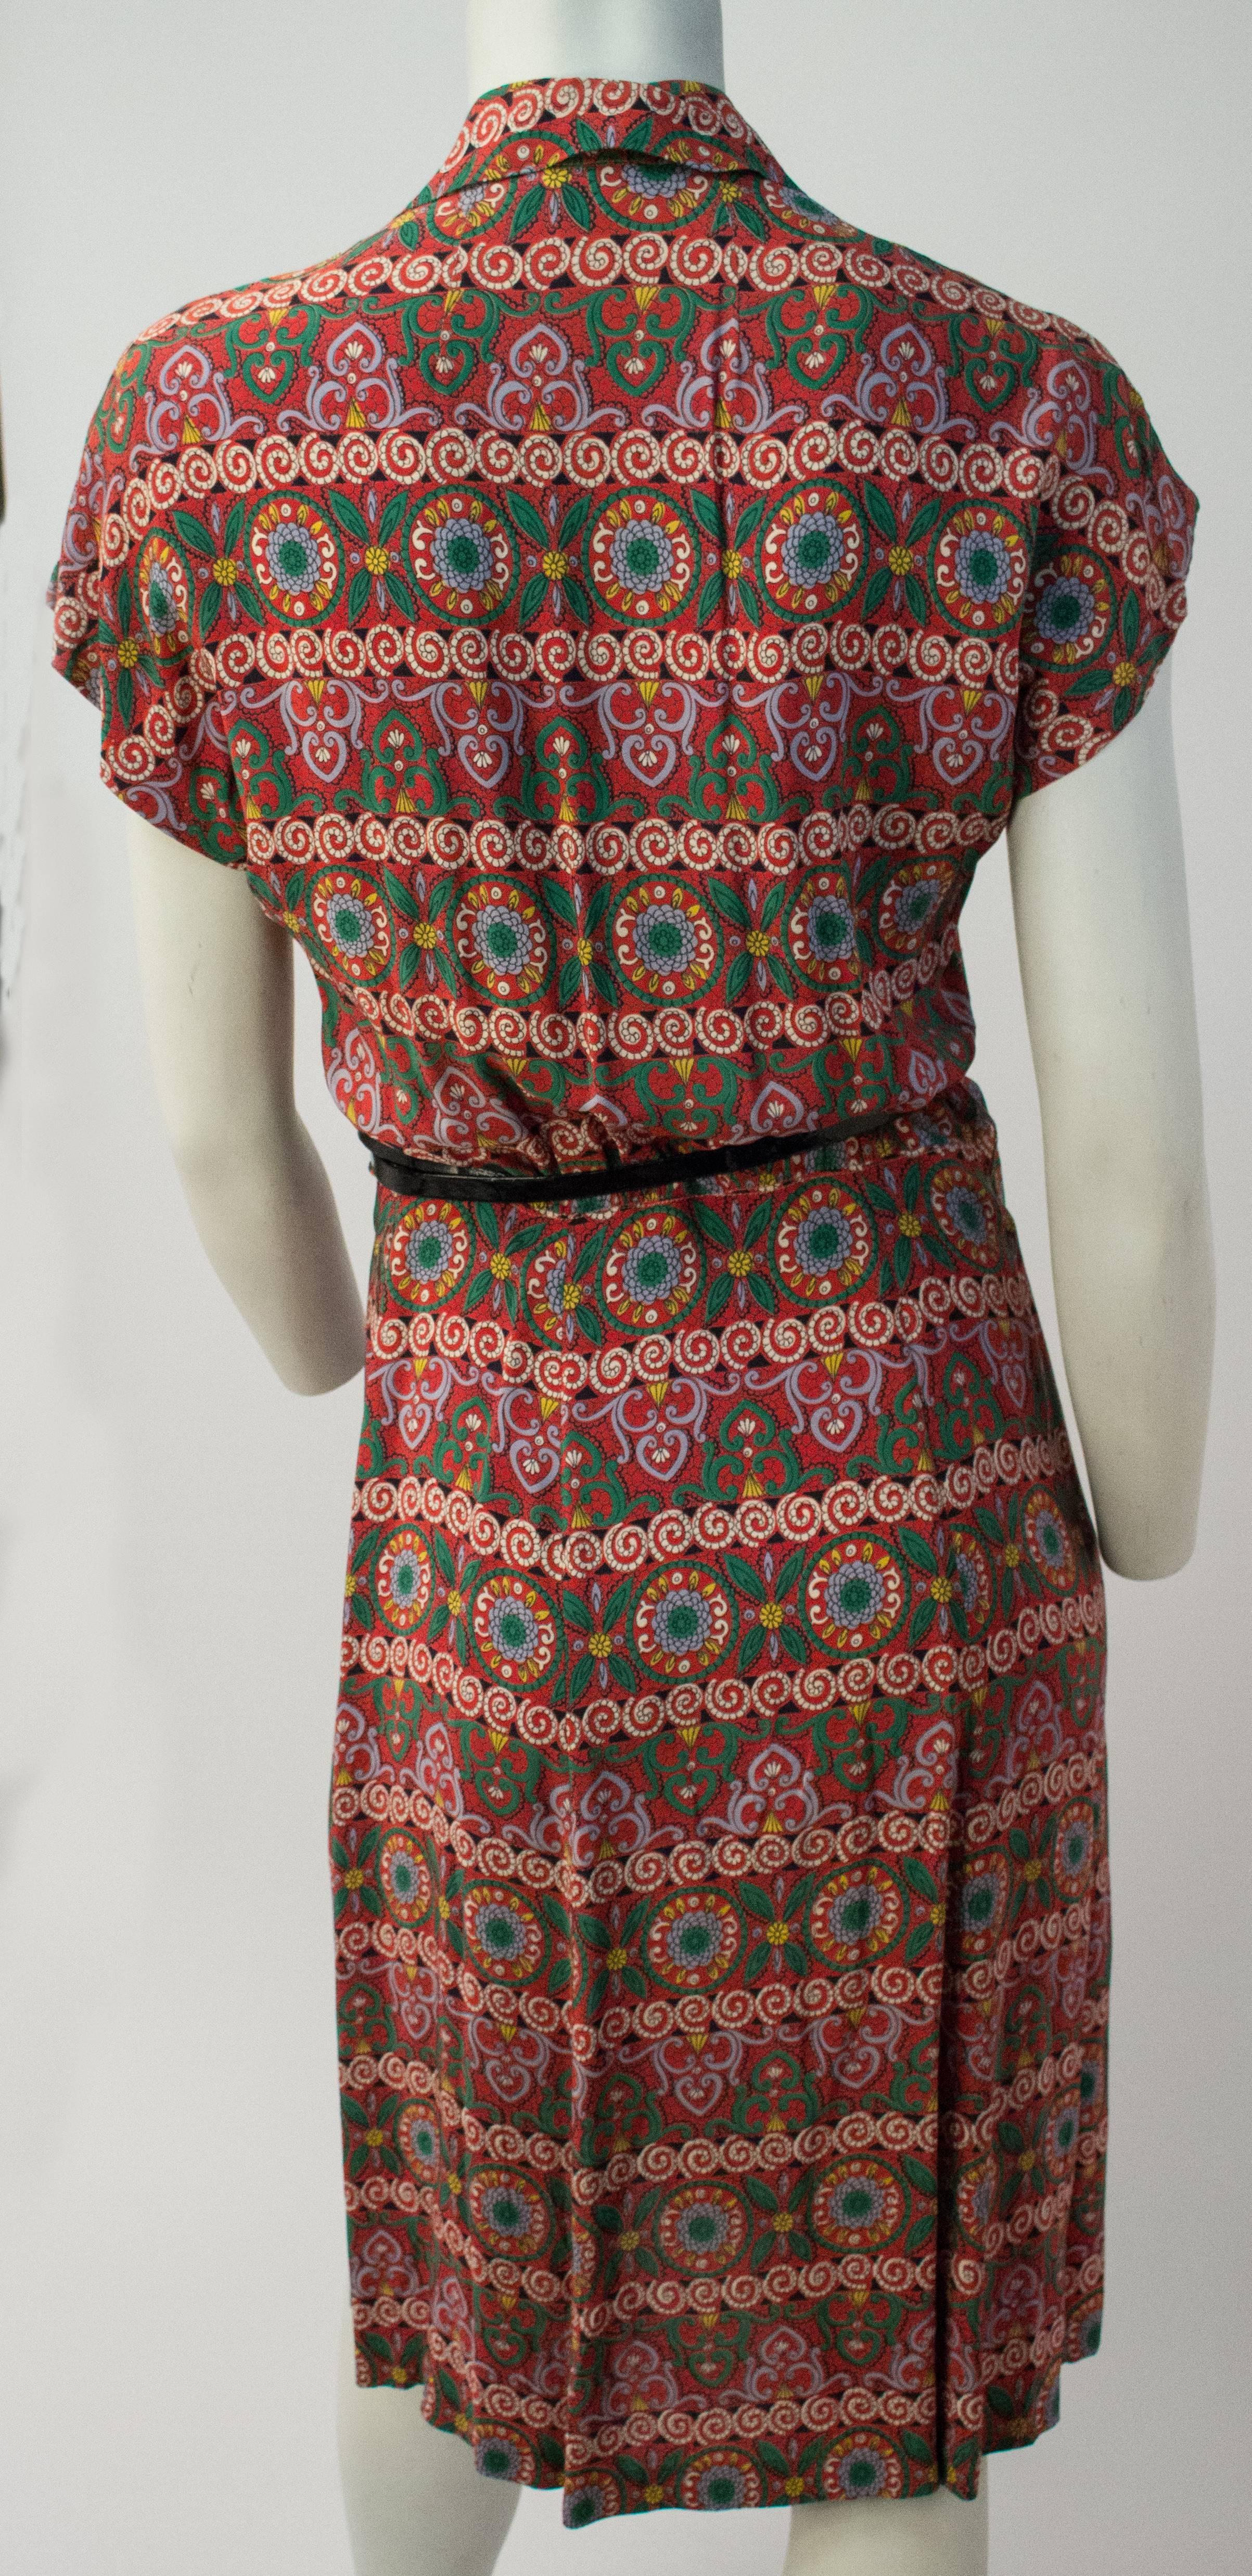 40s Printed Rayon Pleated Dress. Button front closure. Belt included, not original. 